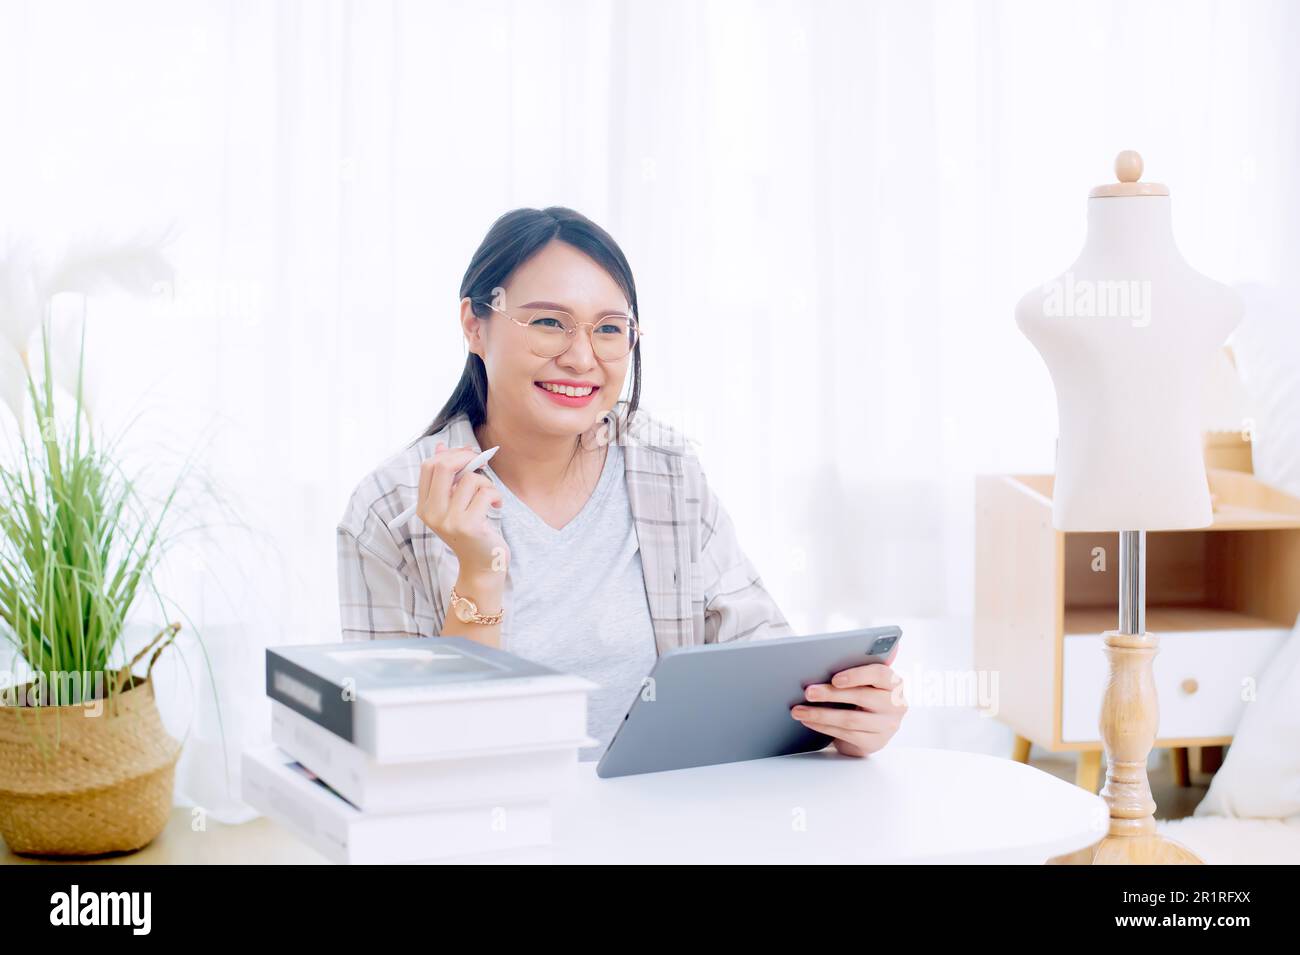 Smiling female fashion designer sitting at a table working on a digital tablet Stock Photo